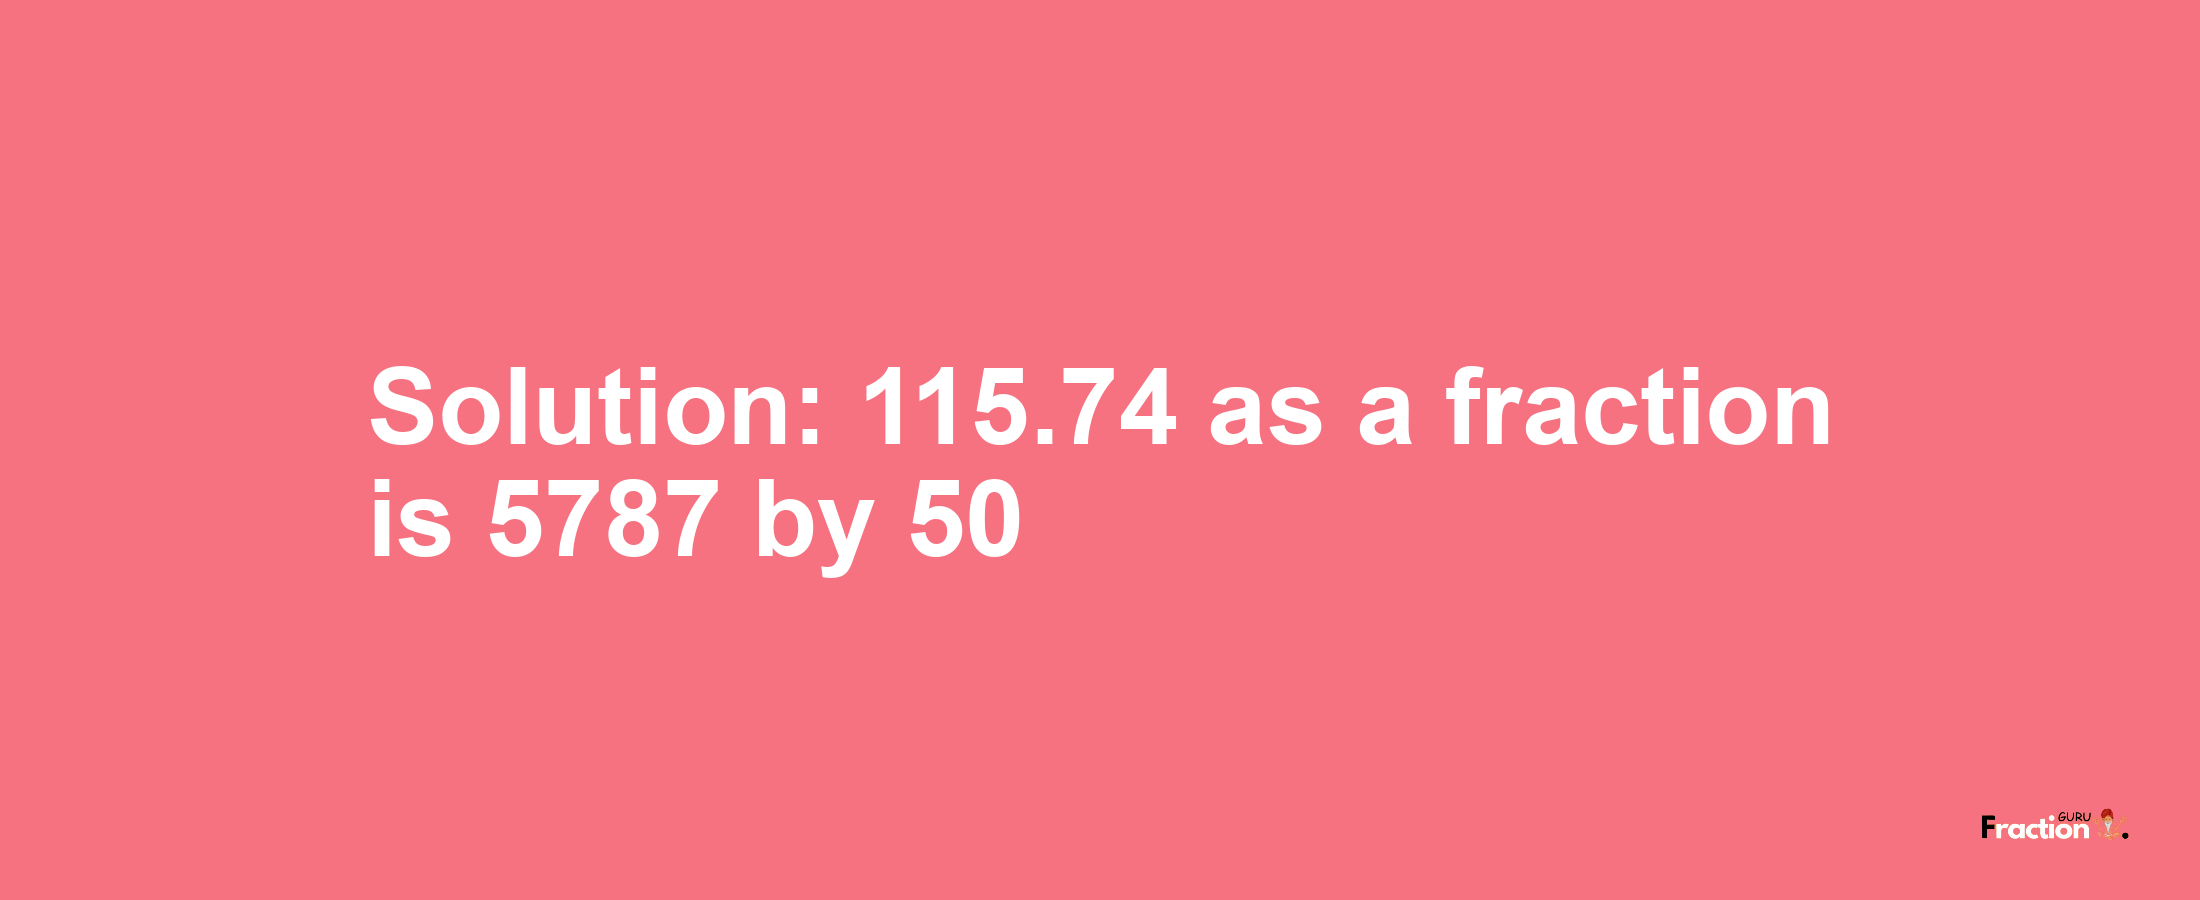 Solution:115.74 as a fraction is 5787/50